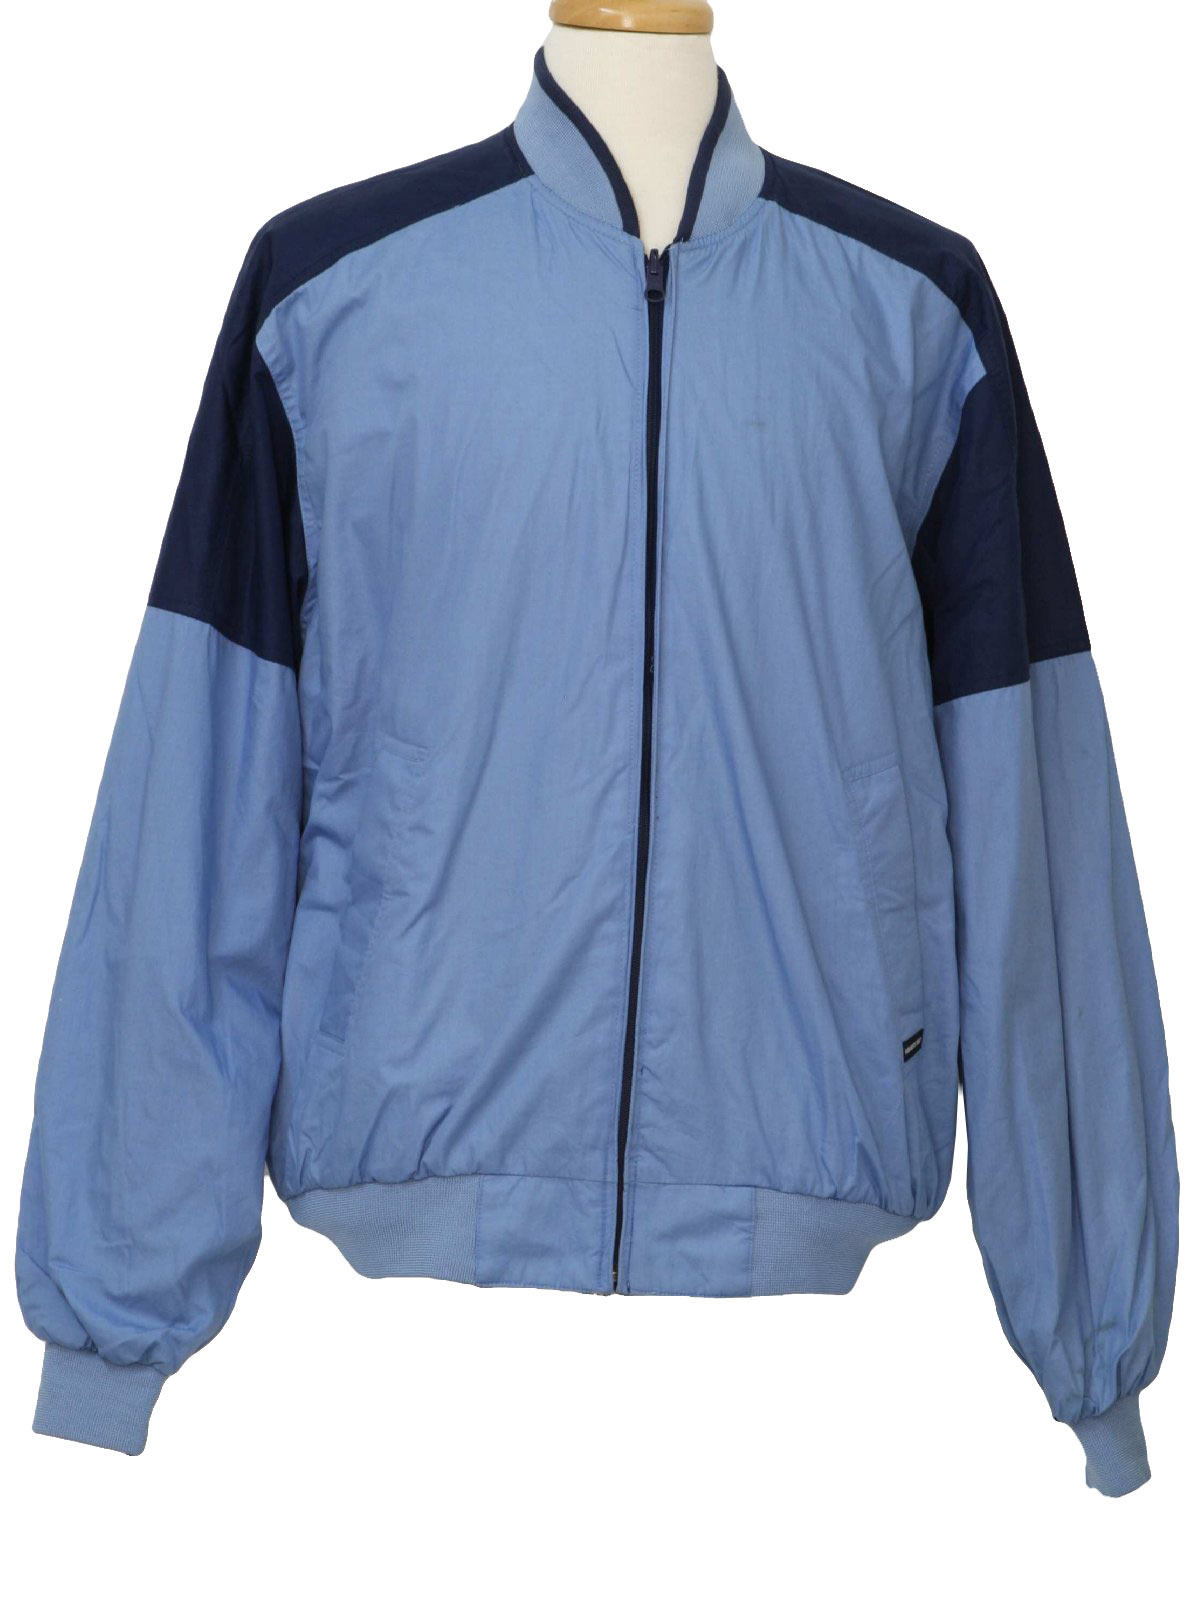 80s Retro Jacket: 80s -Members Only- Mens light blue and navy blue ...